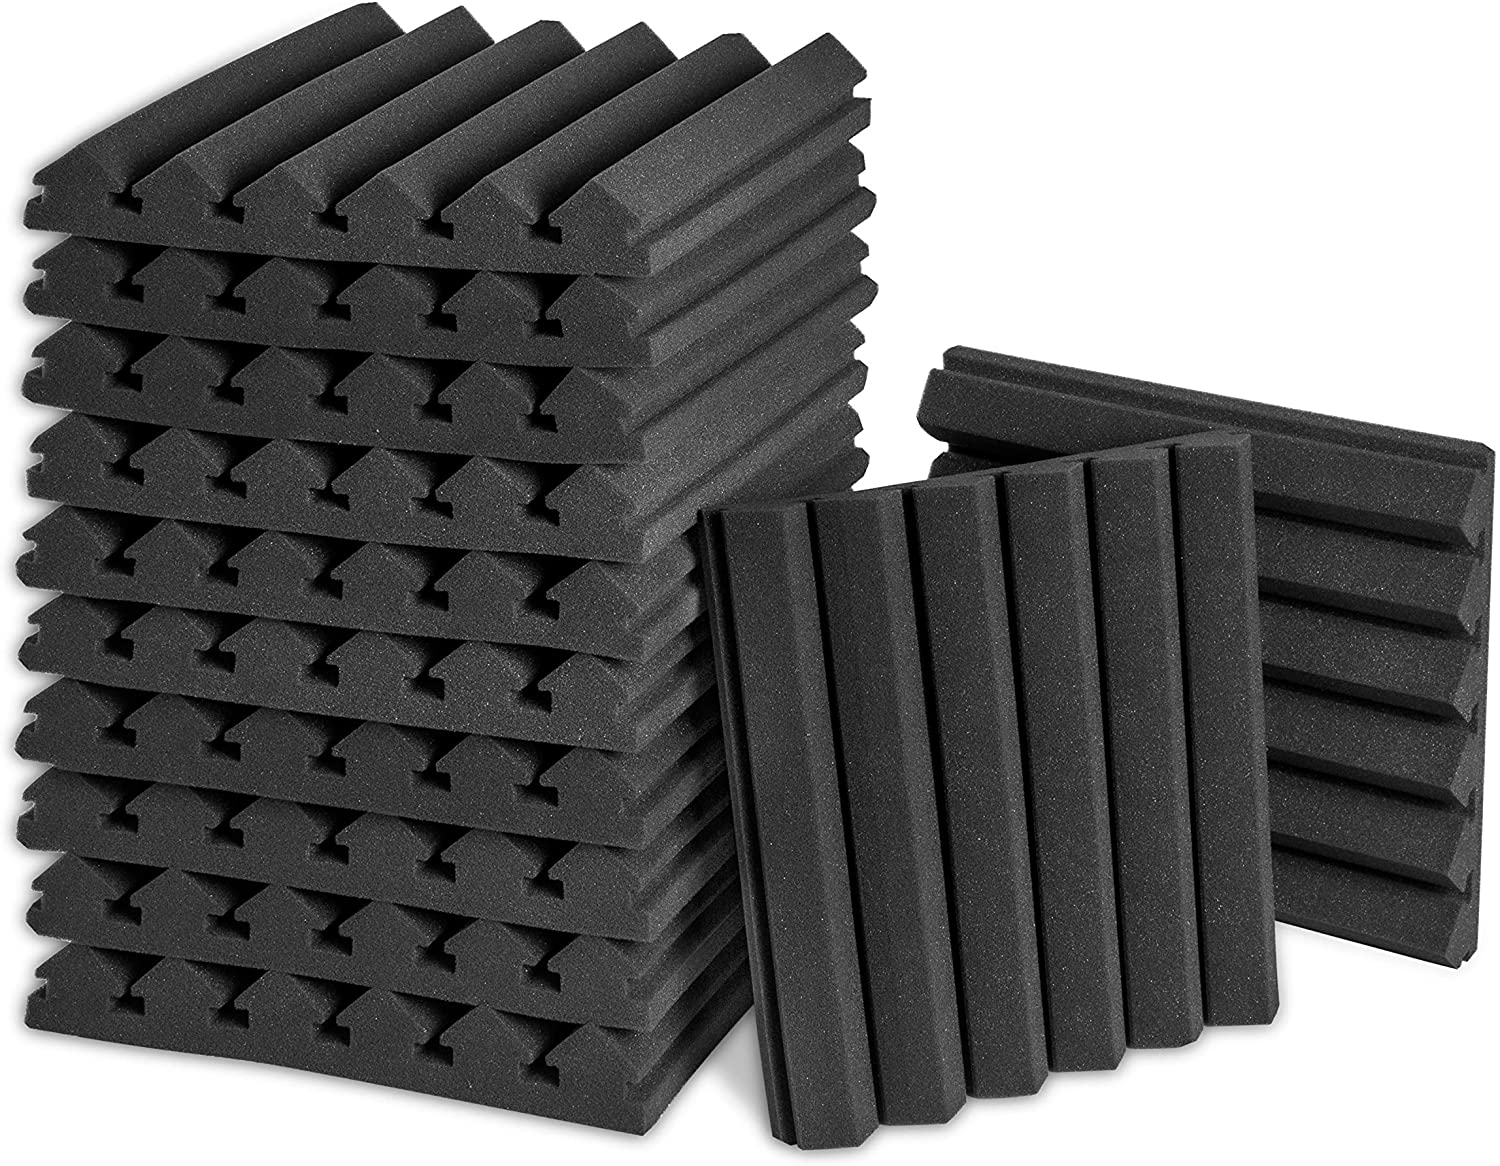 Acoustic Foam Pro-Pack 48 Forest Green Pyramid Studio Soundproof Tiles 12x12x3" 